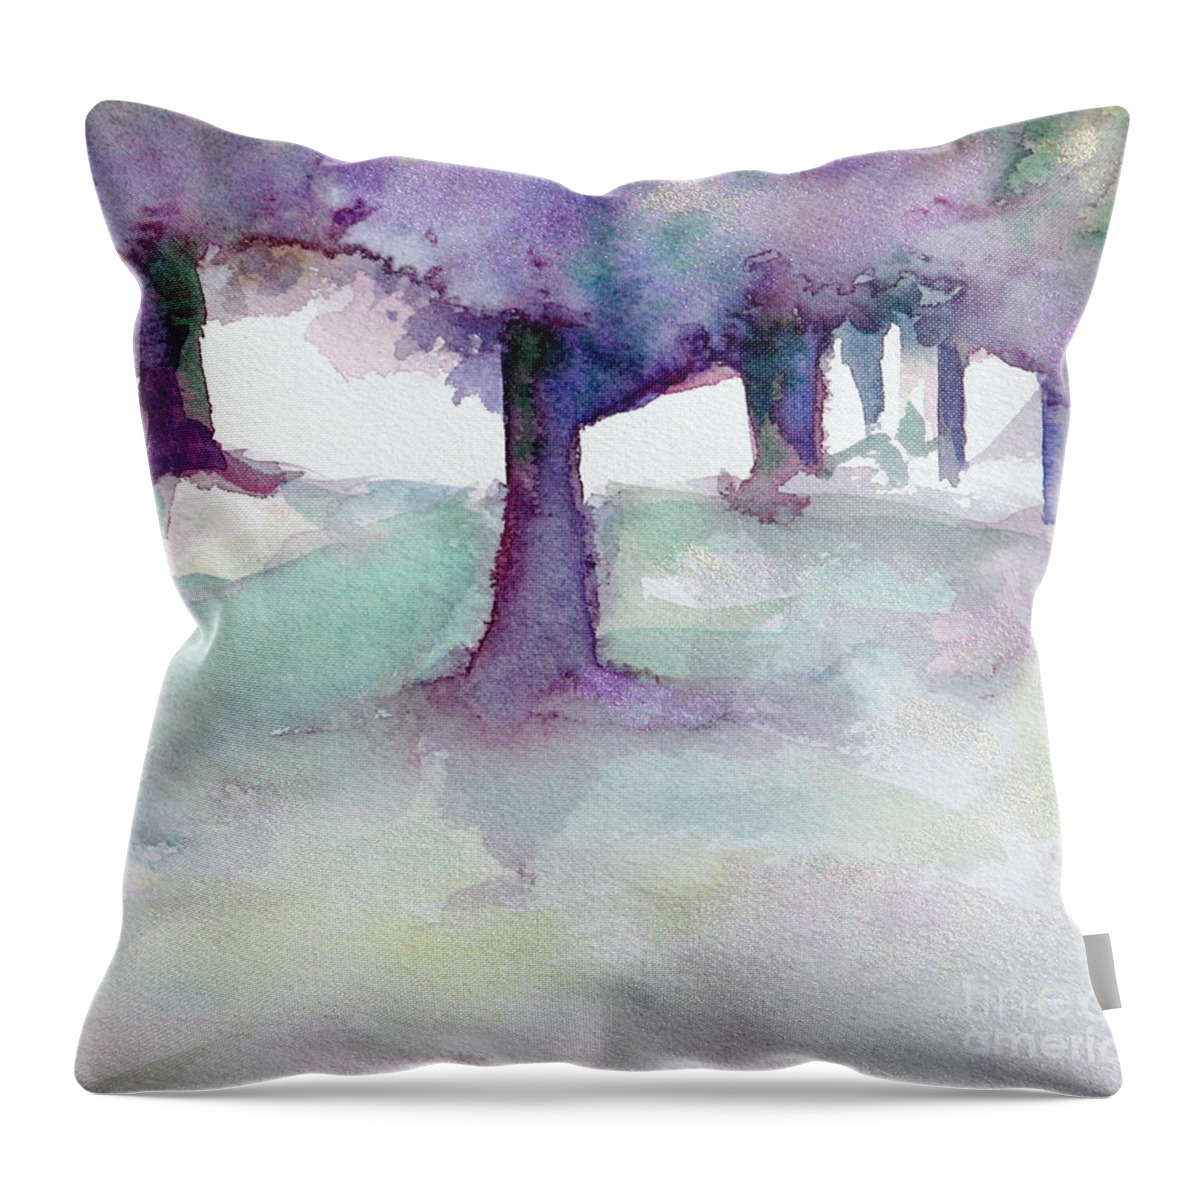 Landscape Throw Pillow featuring the painting Purplescape II by Jan Bennicoff